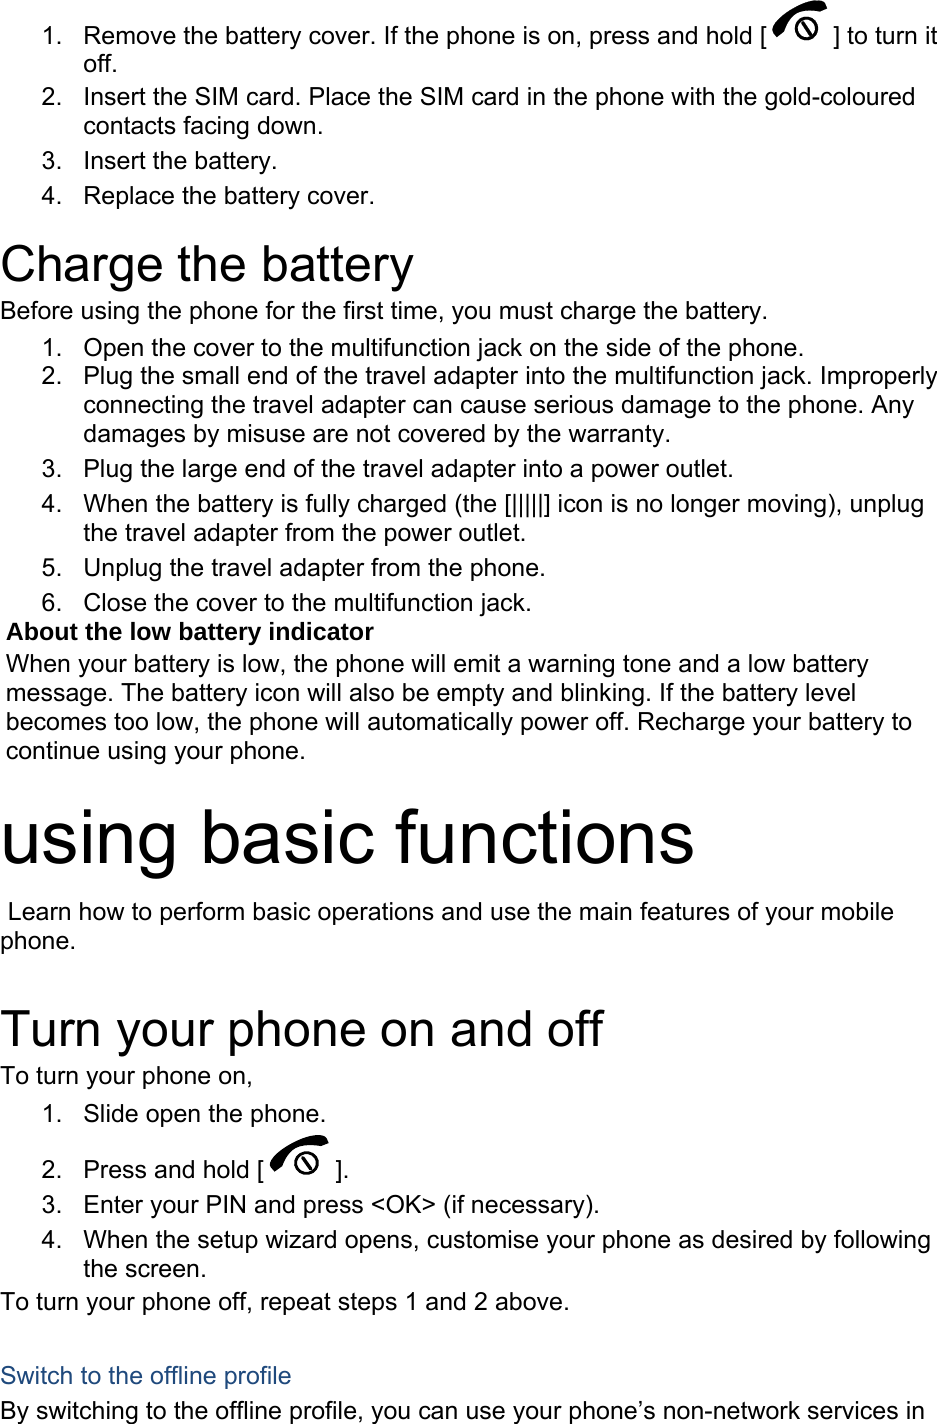 1.  Remove the battery cover. If the phone is on, press and hold [ ] to turn it off. 2.  Insert the SIM card. Place the SIM card in the phone with the gold-coloured contacts facing down. 3. Insert the battery. 4.  Replace the battery cover.  Charge the battery Before using the phone for the first time, you must charge the battery. 1.  Open the cover to the multifunction jack on the side of the phone. 2.  Plug the small end of the travel adapter into the multifunction jack. Improperly connecting the travel adapter can cause serious damage to the phone. Any damages by misuse are not covered by the warranty. 3.  Plug the large end of the travel adapter into a power outlet. 4.  When the battery is fully charged (the [|||||] icon is no longer moving), unplug the travel adapter from the power outlet. 5.  Unplug the travel adapter from the phone. 6.  Close the cover to the multifunction jack. About the low battery indicator When your battery is low, the phone will emit a warning tone and a low battery message. The battery icon will also be empty and blinking. If the battery level becomes too low, the phone will automatically power off. Recharge your battery to continue using your phone.  using basic functions  Learn how to perform basic operations and use the main features of your mobile phone.   Turn your phone on and off To turn your phone on, 1.  Slide open the phone. 2.  Press and hold [ ]. 3.  Enter your PIN and press &lt;OK&gt; (if necessary). 4.  When the setup wizard opens, customise your phone as desired by following the screen. To turn your phone off, repeat steps 1 and 2 above.  Switch to the offline profile By switching to the offline profile, you can use your phone’s non-network services in 